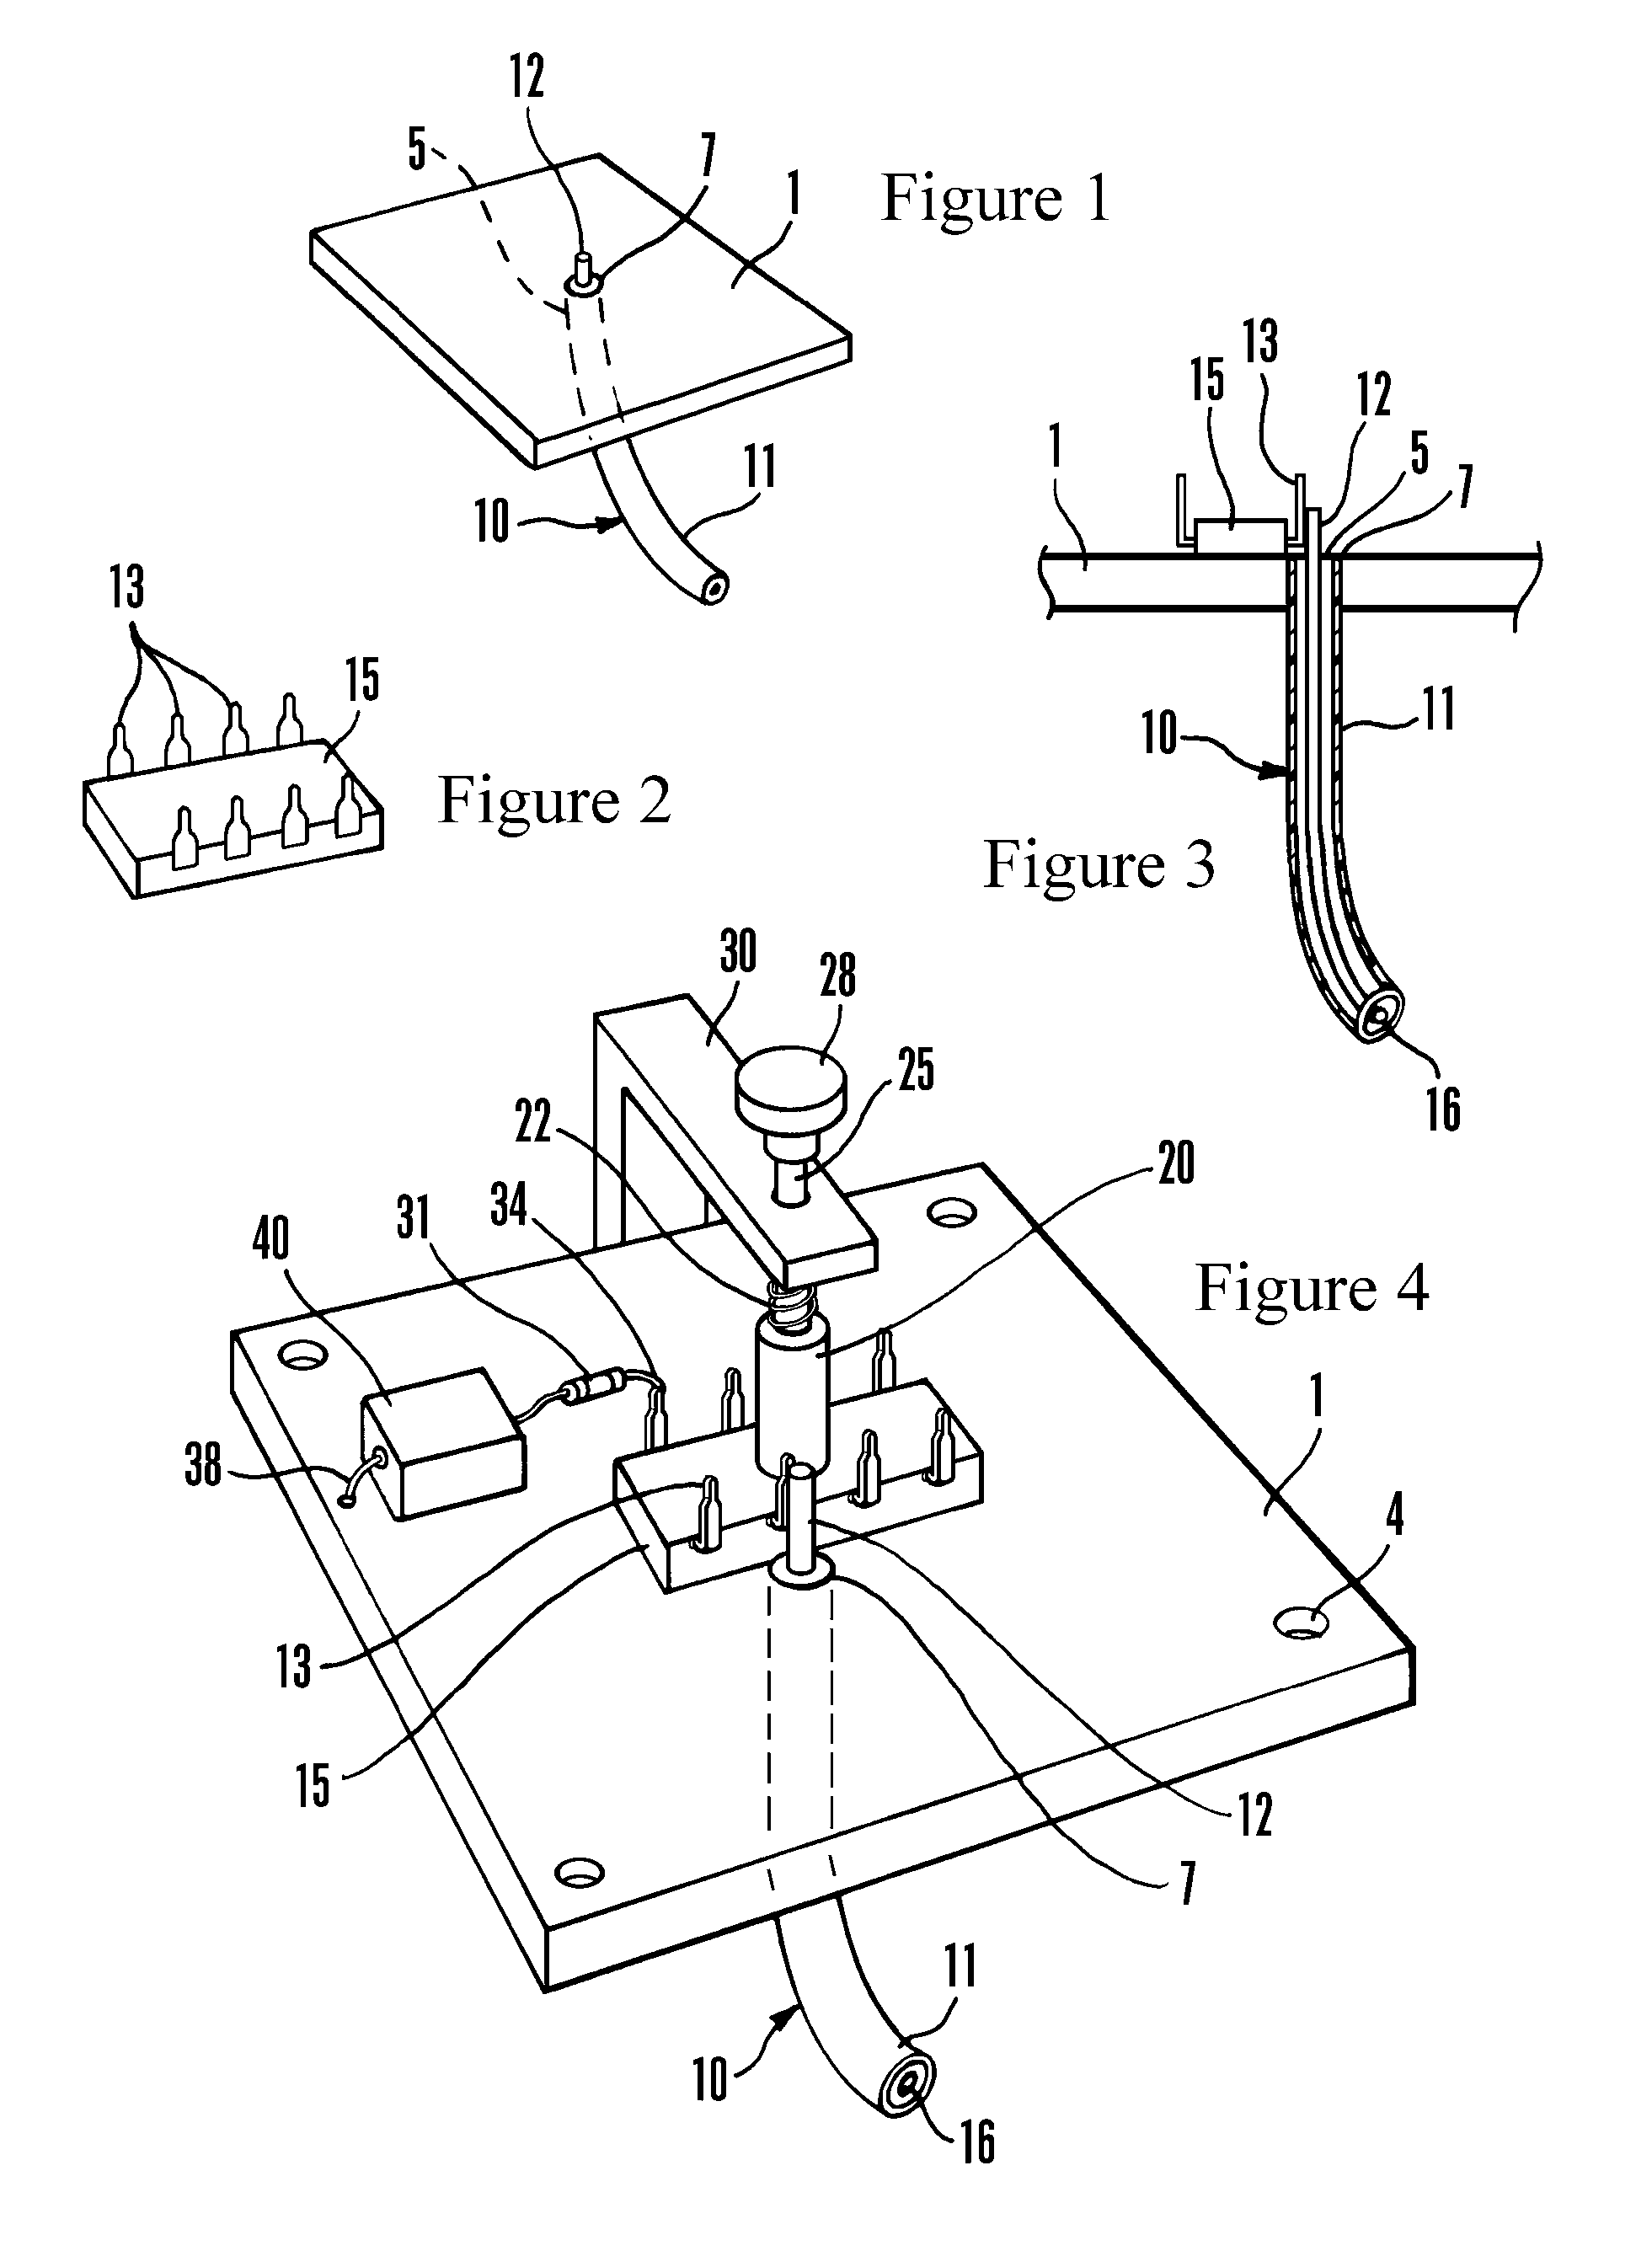 Charged device model contact plate